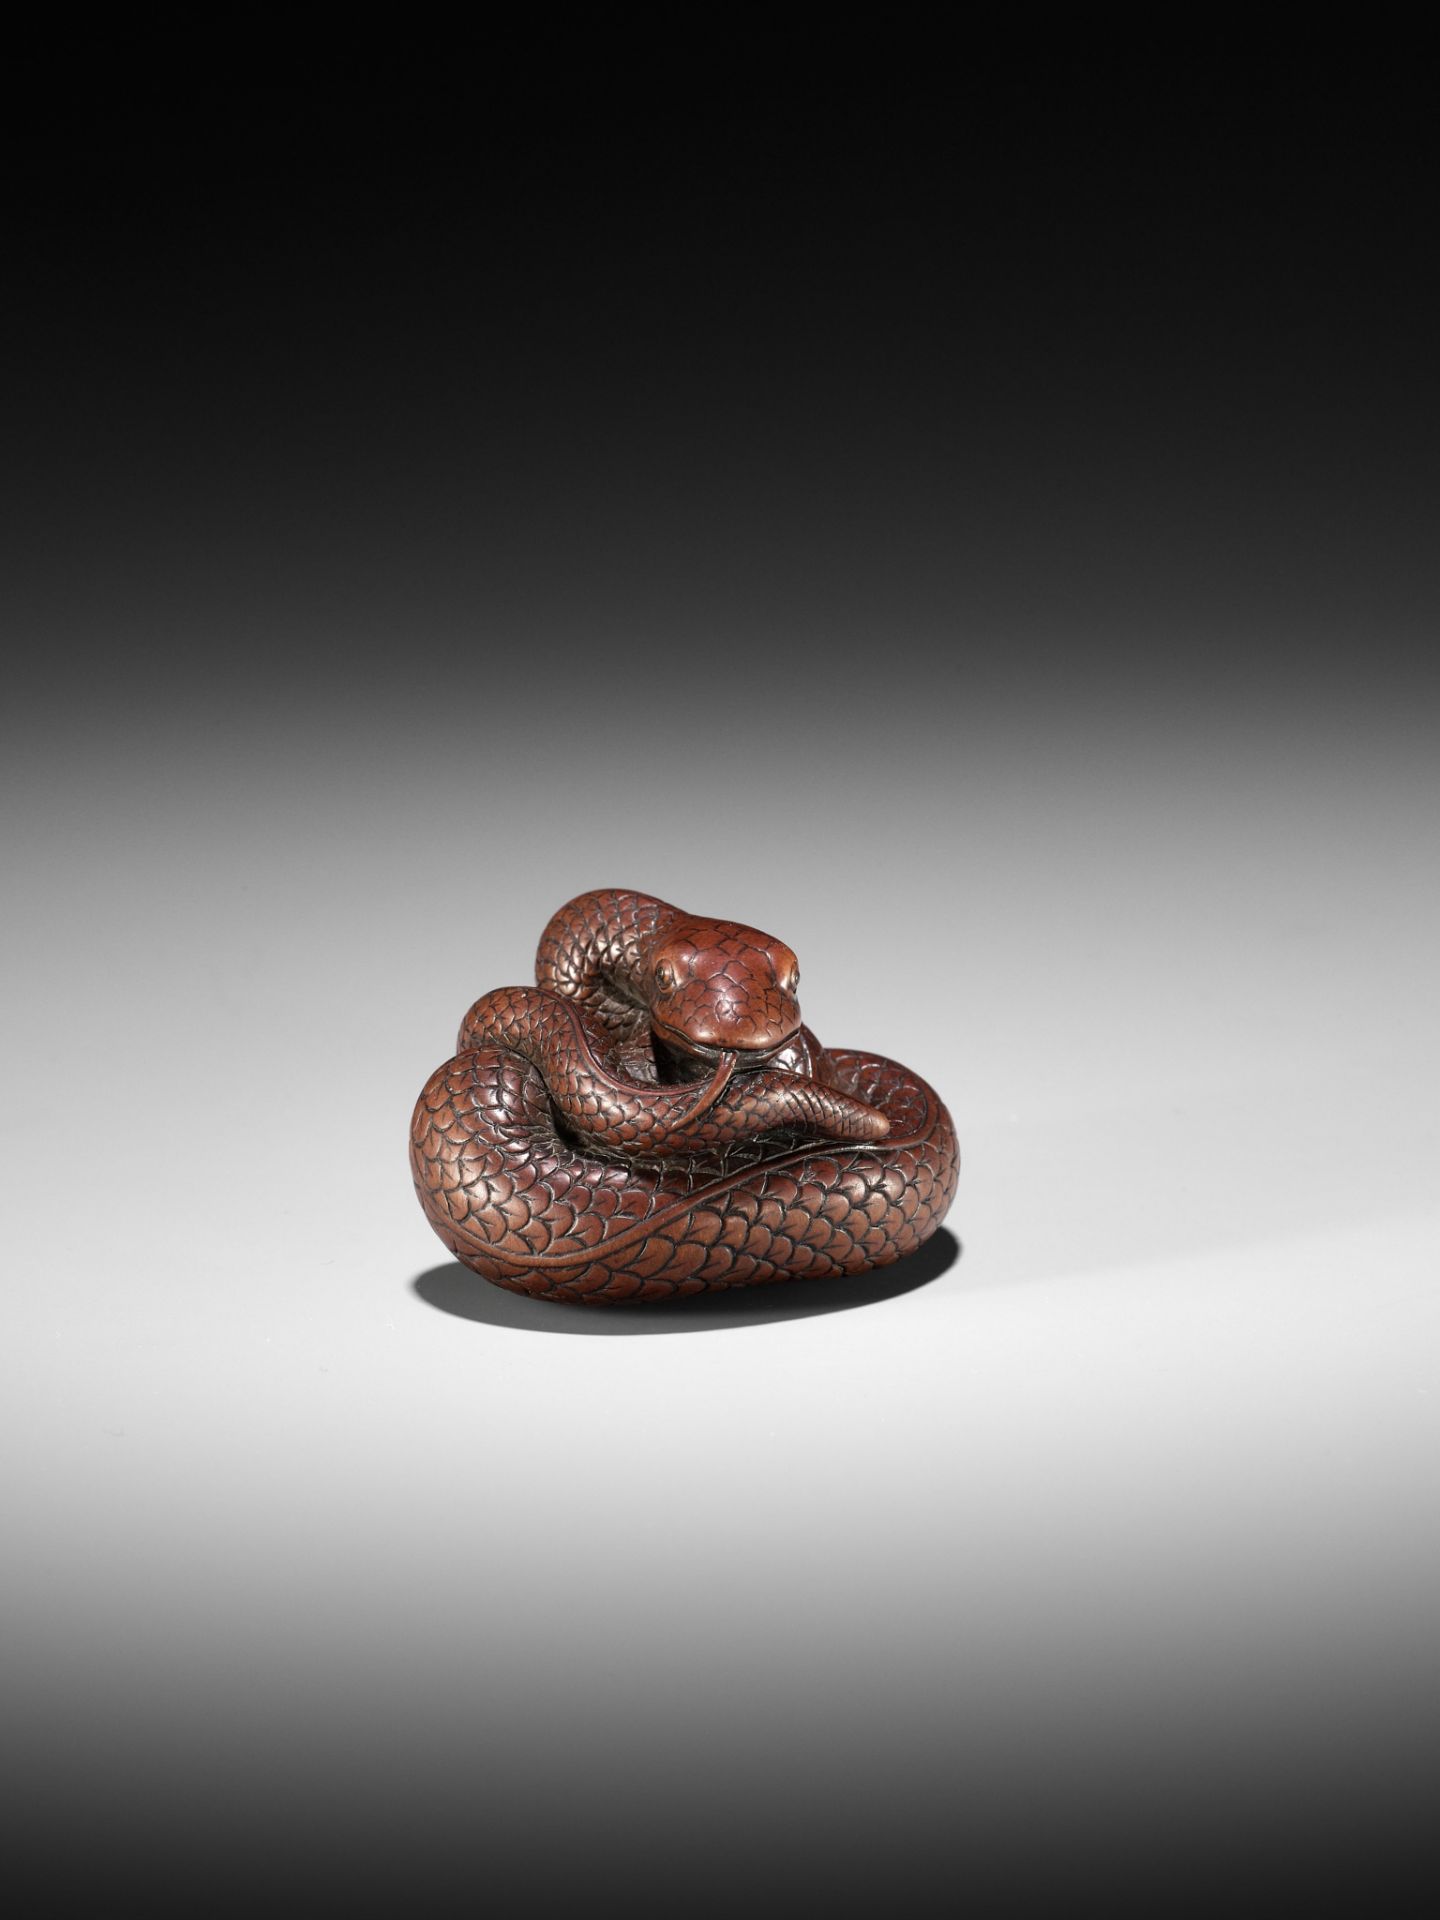 AN EXCEPTIONAL AND LARGE WOOD NETSUKE OF A SNAKE, ATTRIBUTED TO OKATOMO - Image 3 of 19